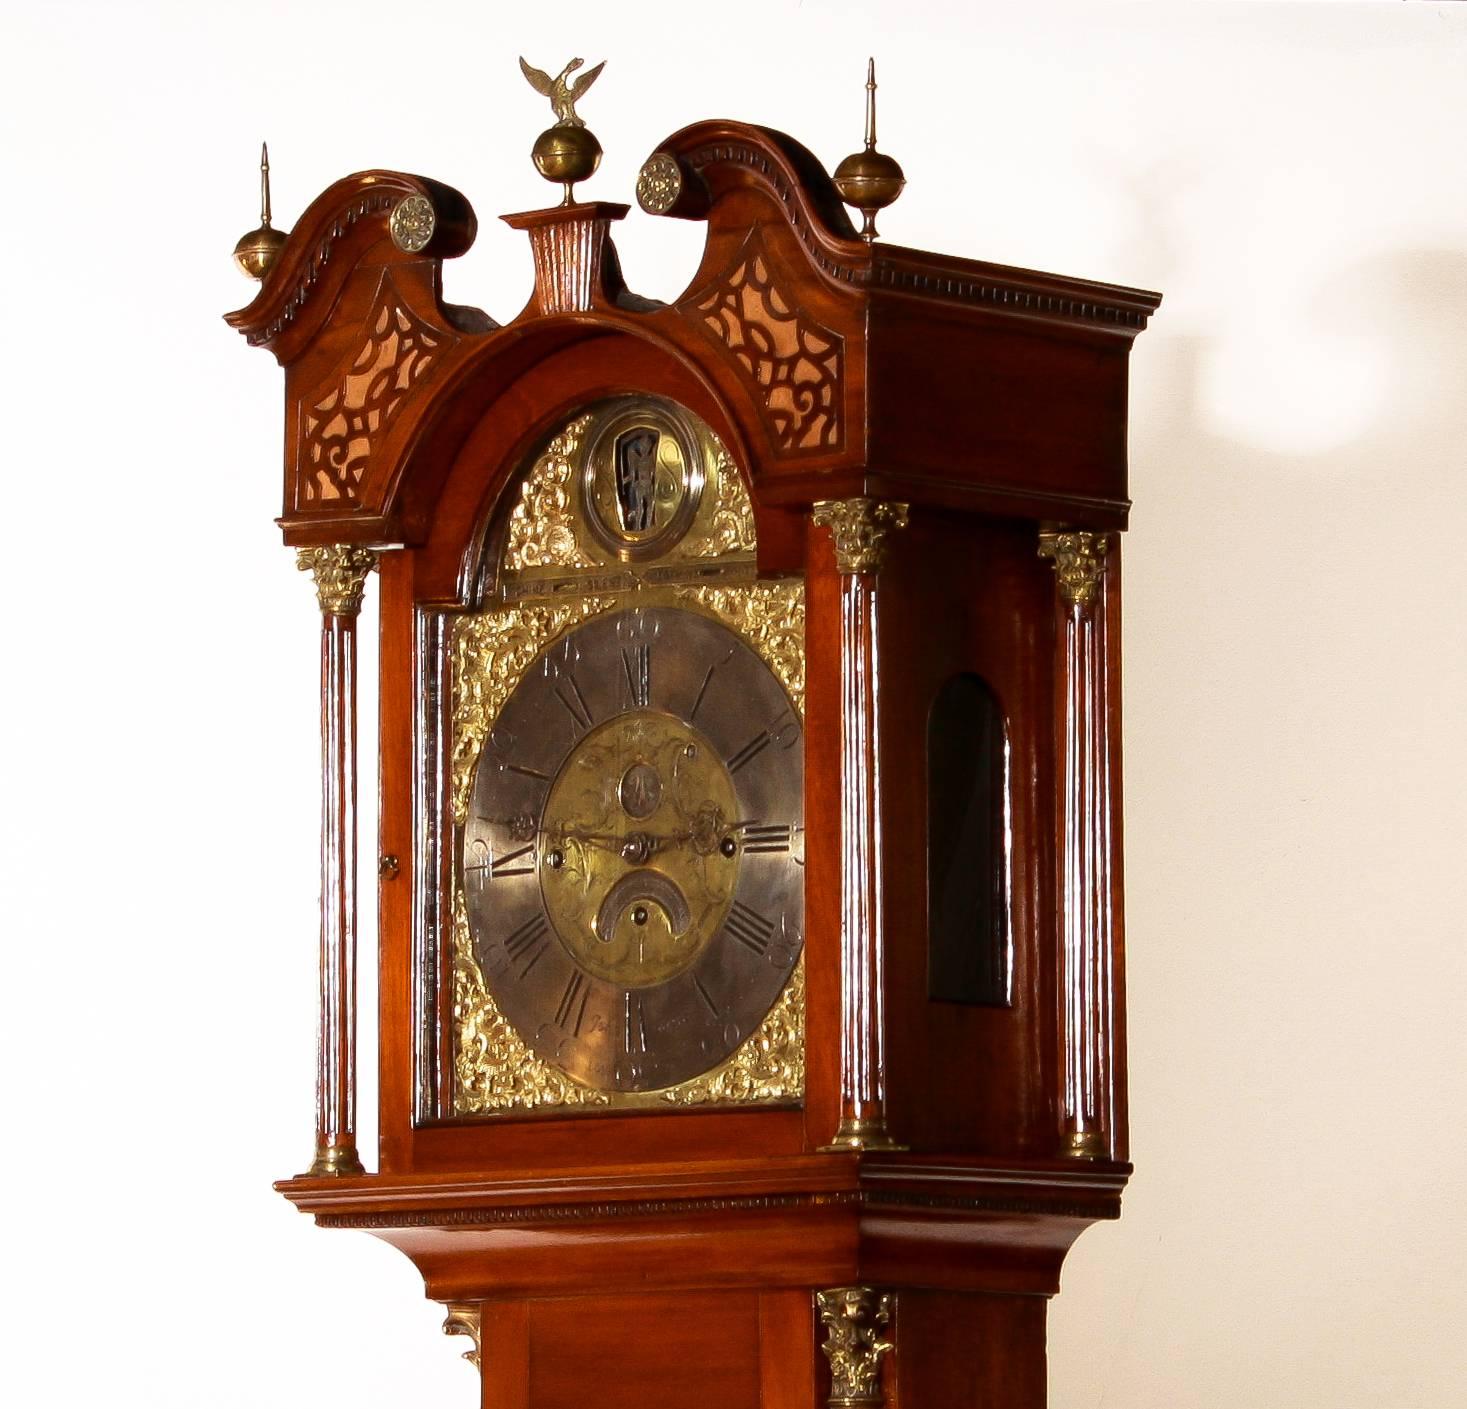 Excellent quarter-chiming (Westminster) musical longcase clock in mahogany.

Master piece with slim and elegant design.

Very exclusive dial with brass and gilded brass details.

Beside that the excellent silvered chapter ring shows regular